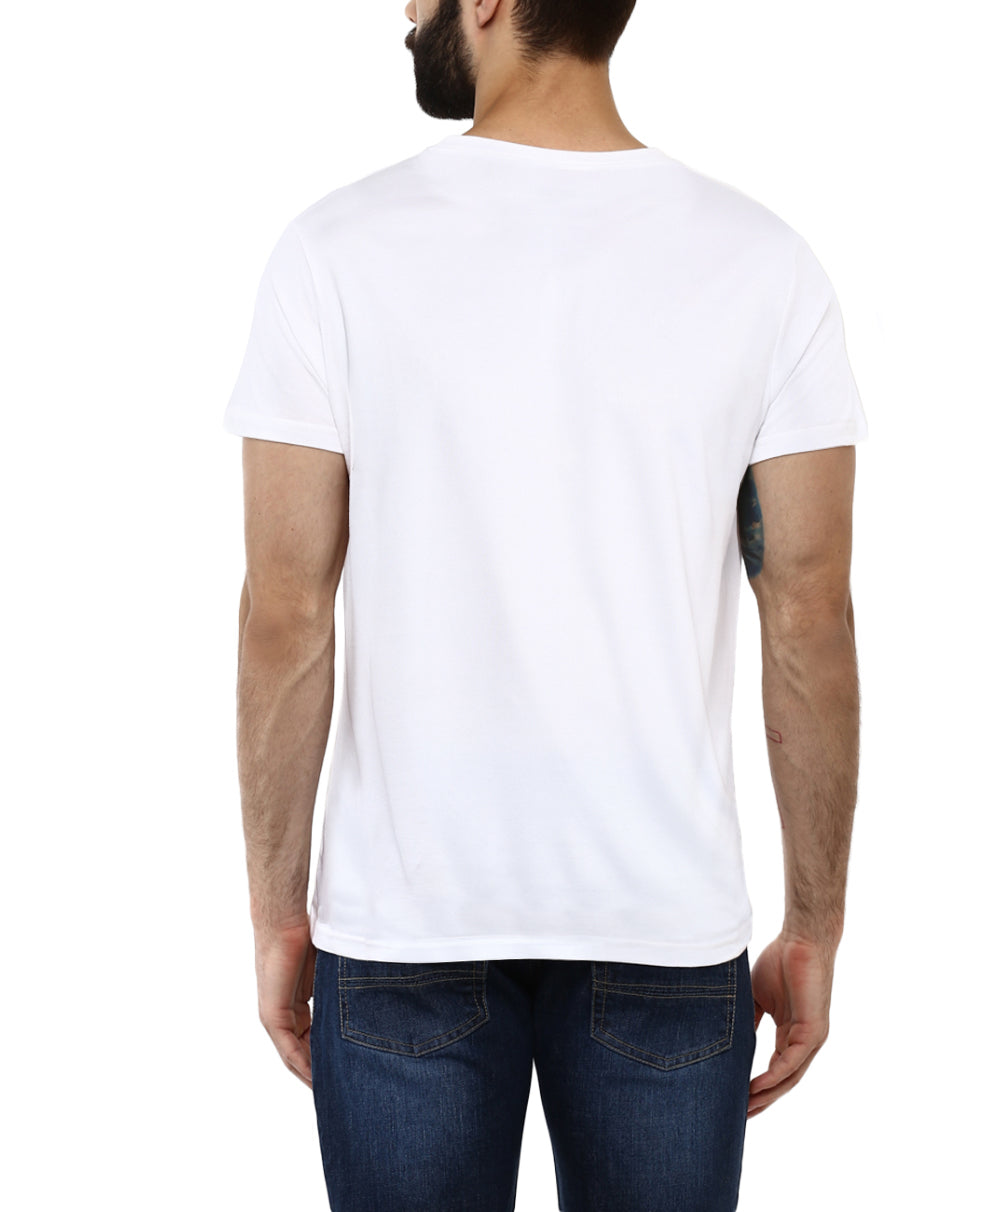 Men's Round Neck Half Sleeves Sports T-Shirts Pack of 2 -White & Blue